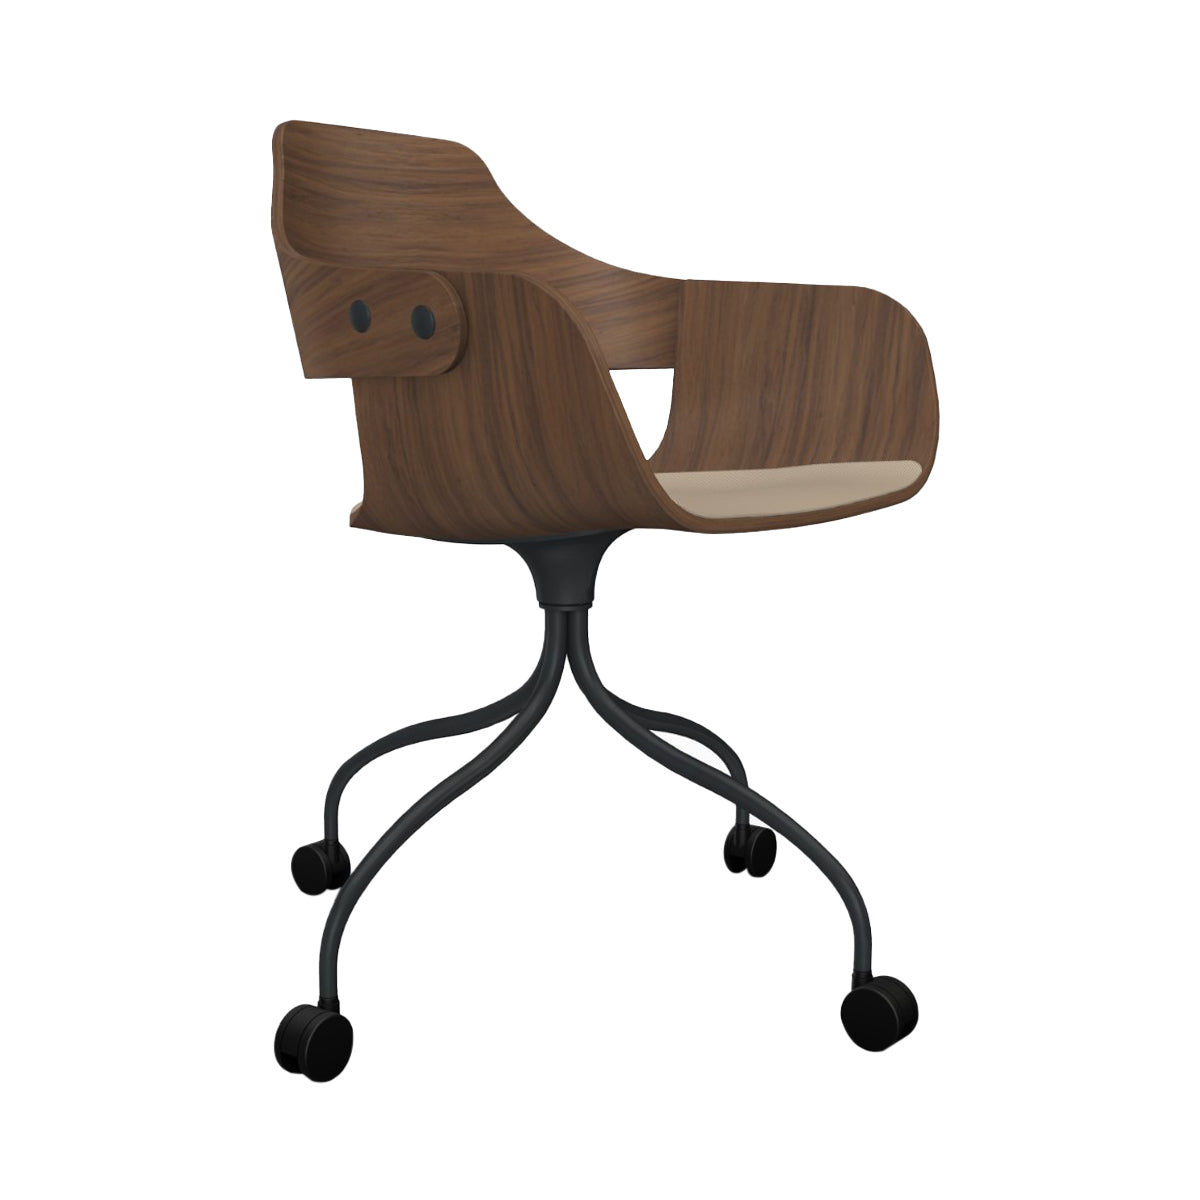 Showtime Chair with Wheel: Seat Upholstered + Anthracite Grey